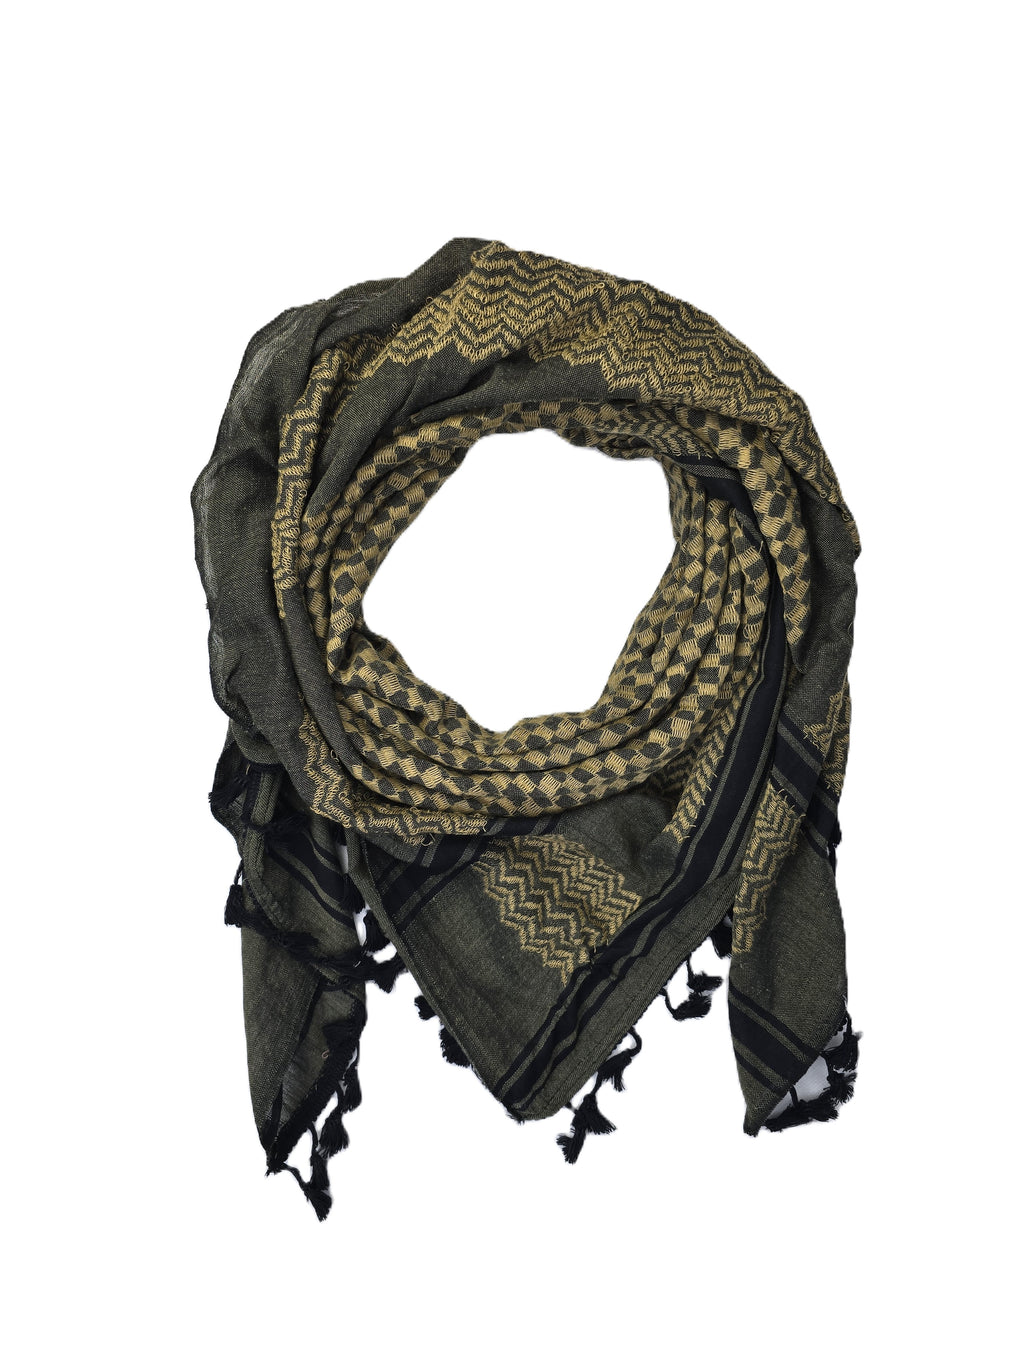 Keffiyeh Scarf Made in Palestine -  Olive and Gold